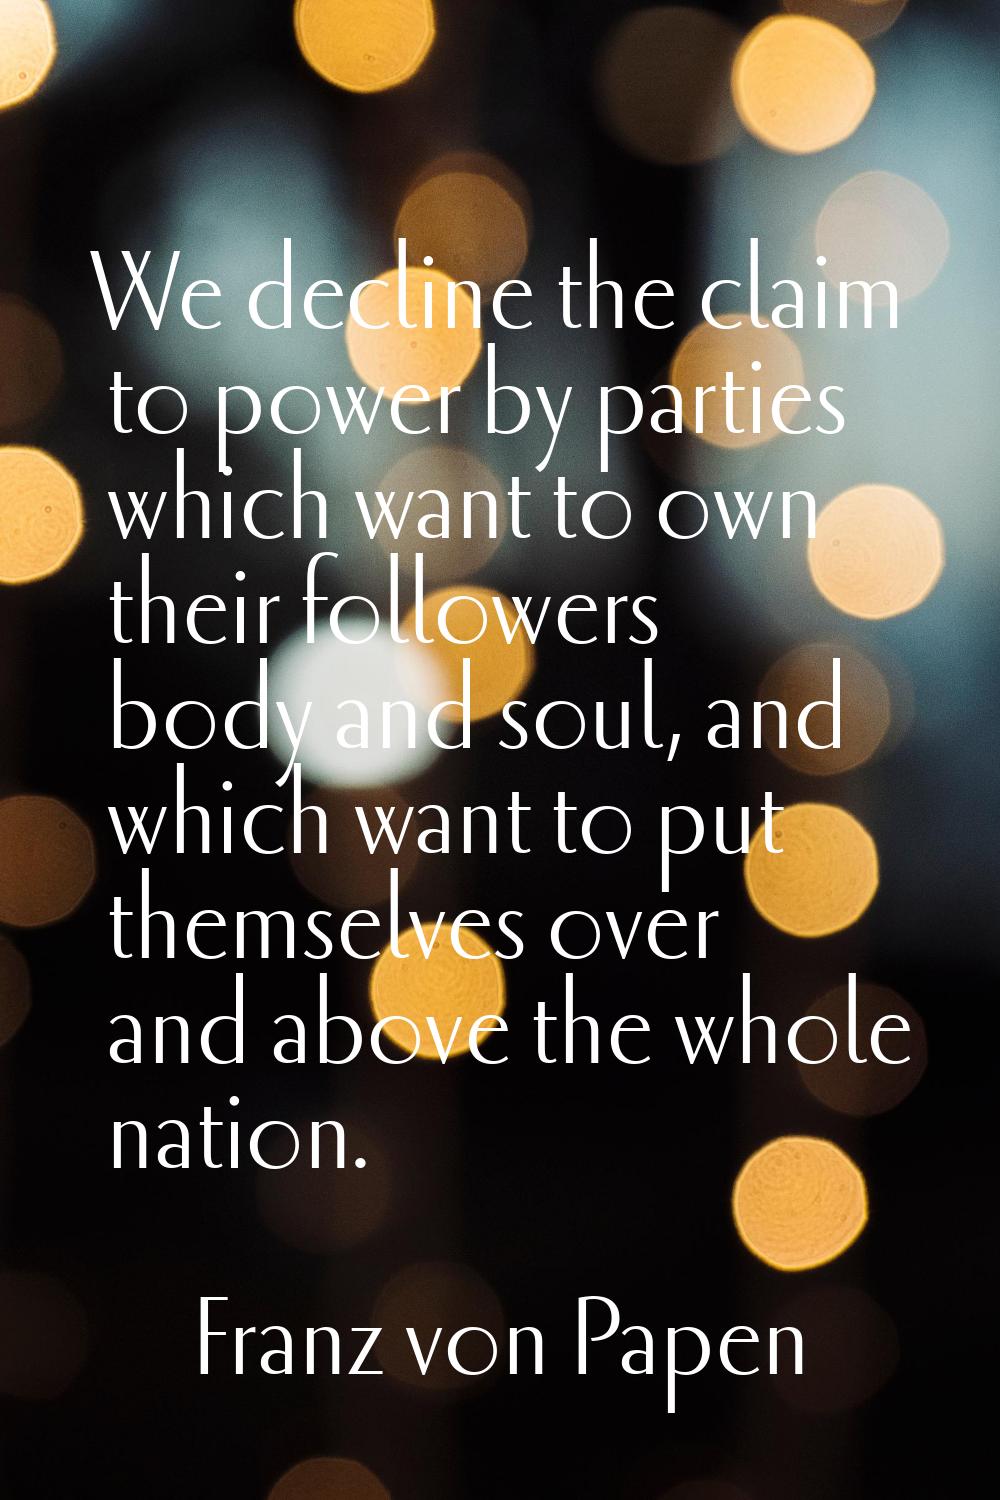 We decline the claim to power by parties which want to own their followers body and soul, and which